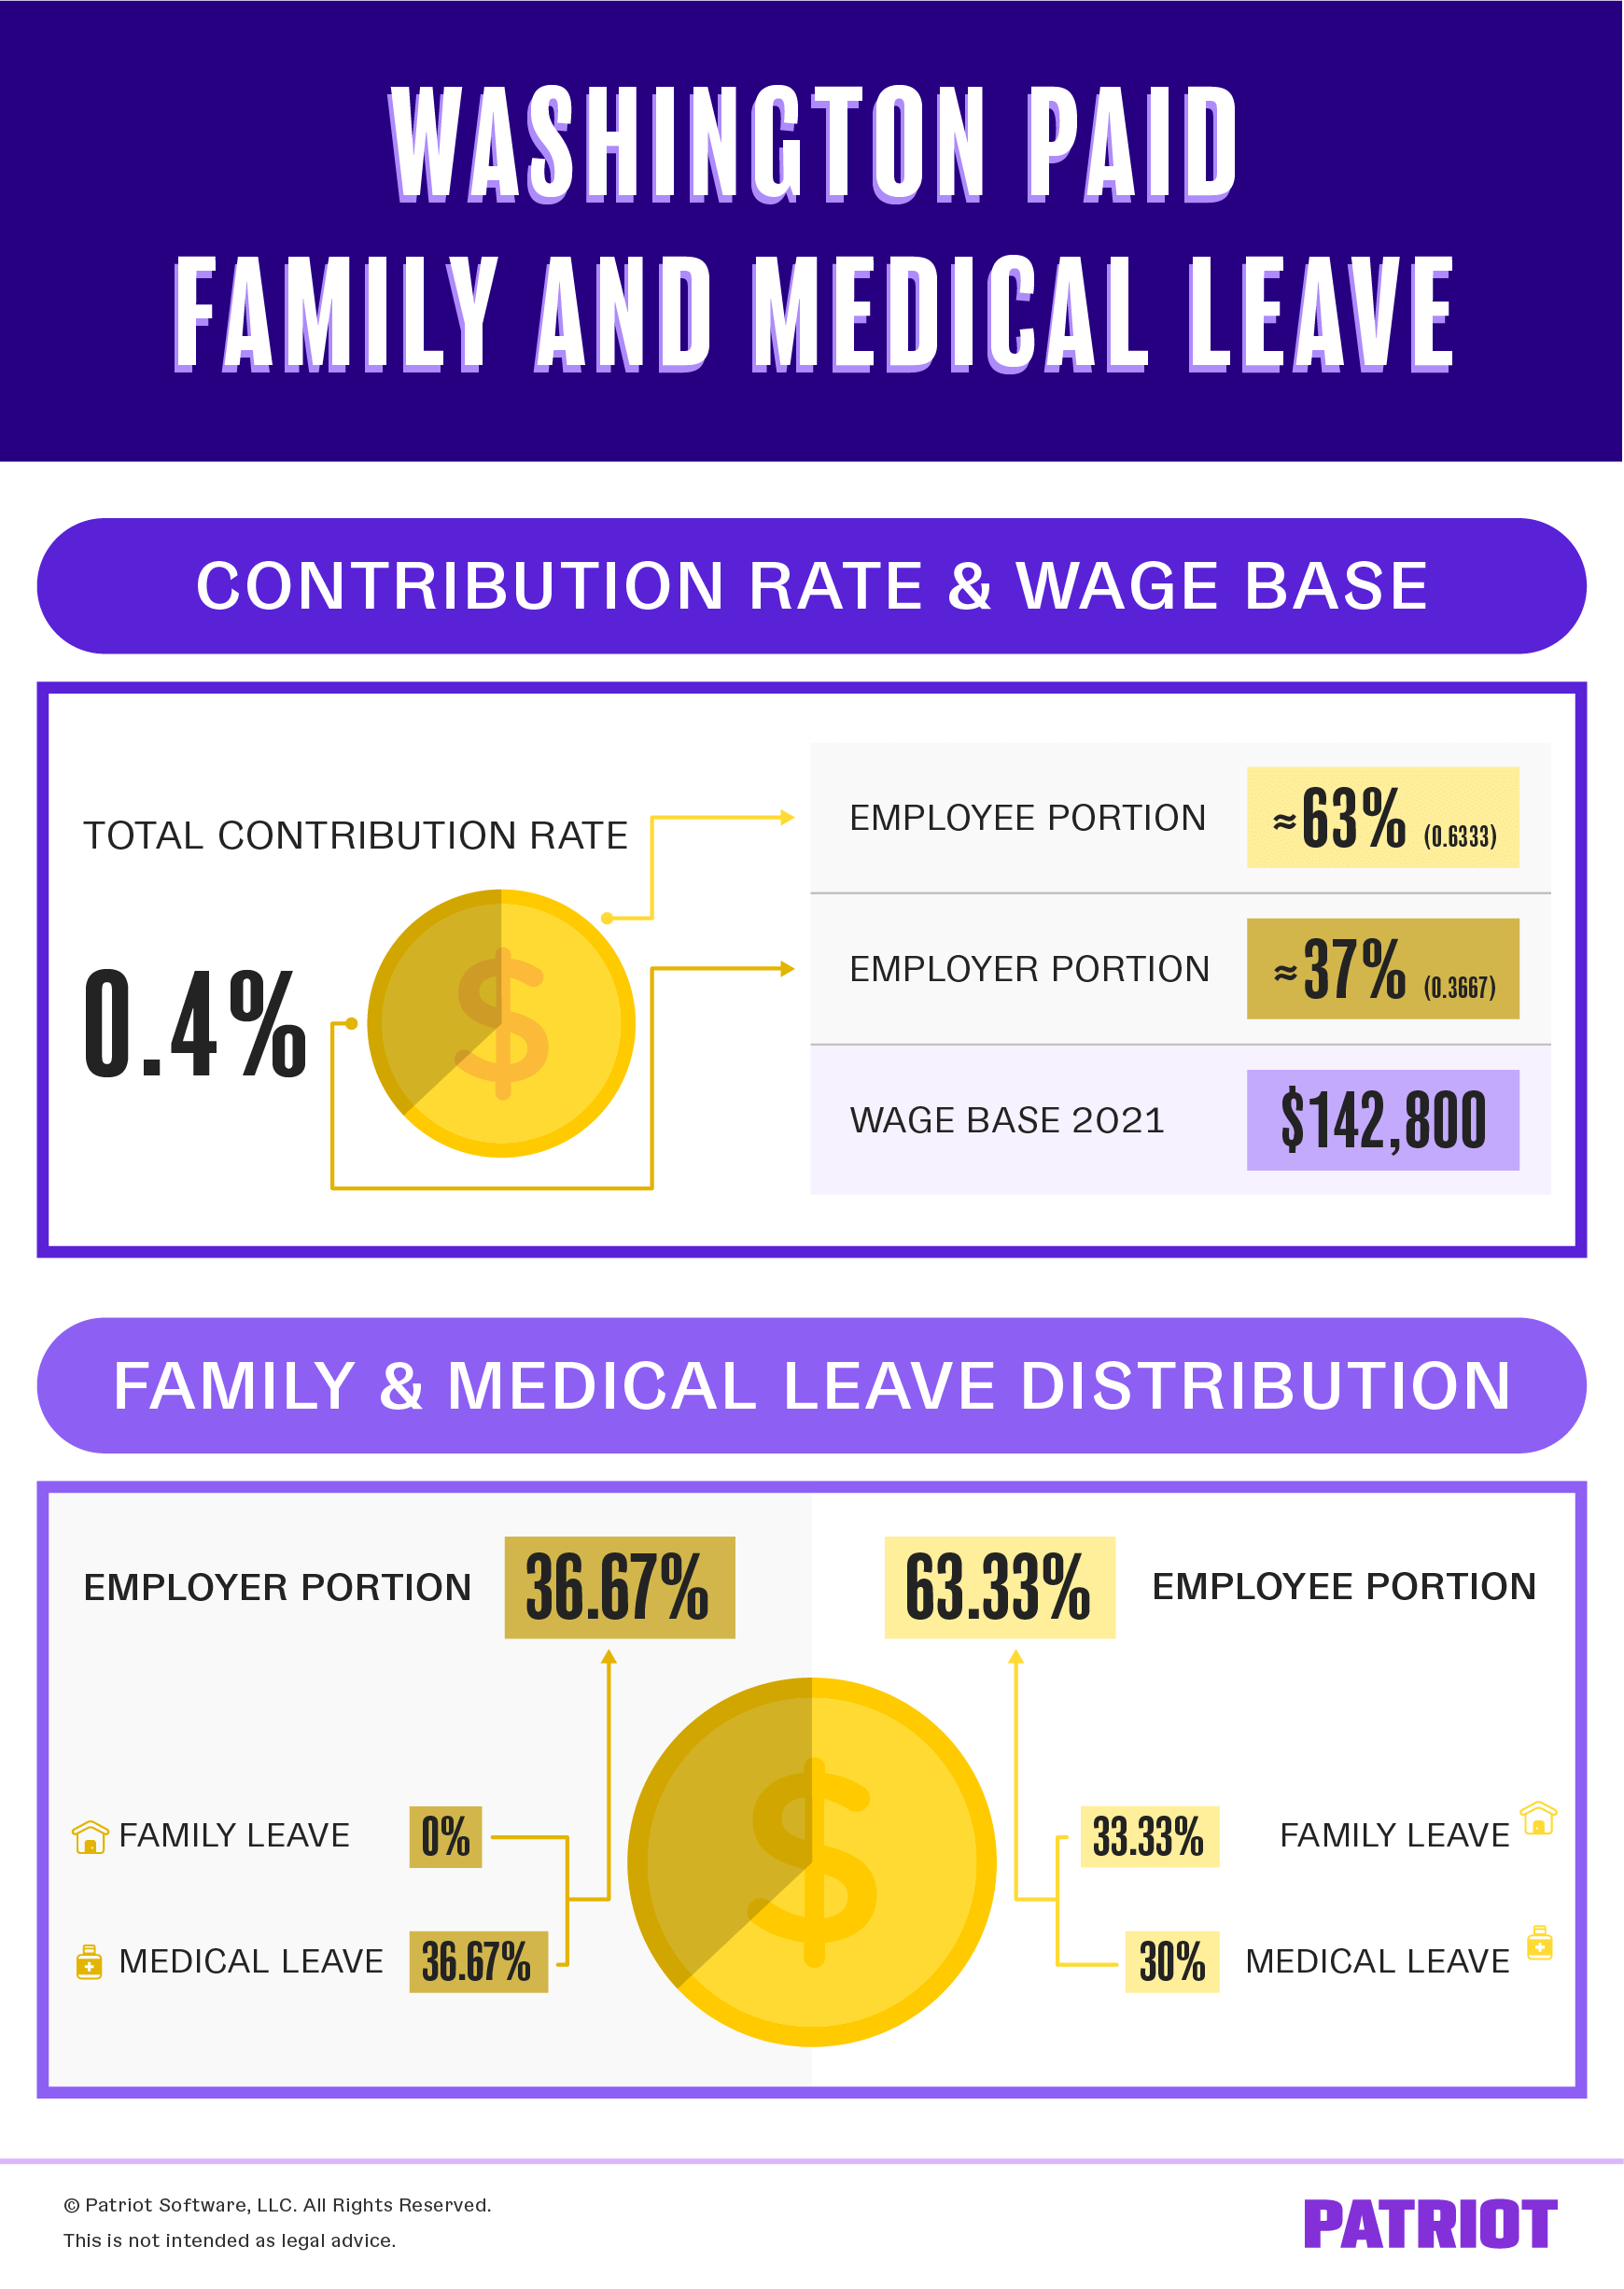 How much does Washington paid family Medical Leave pay?